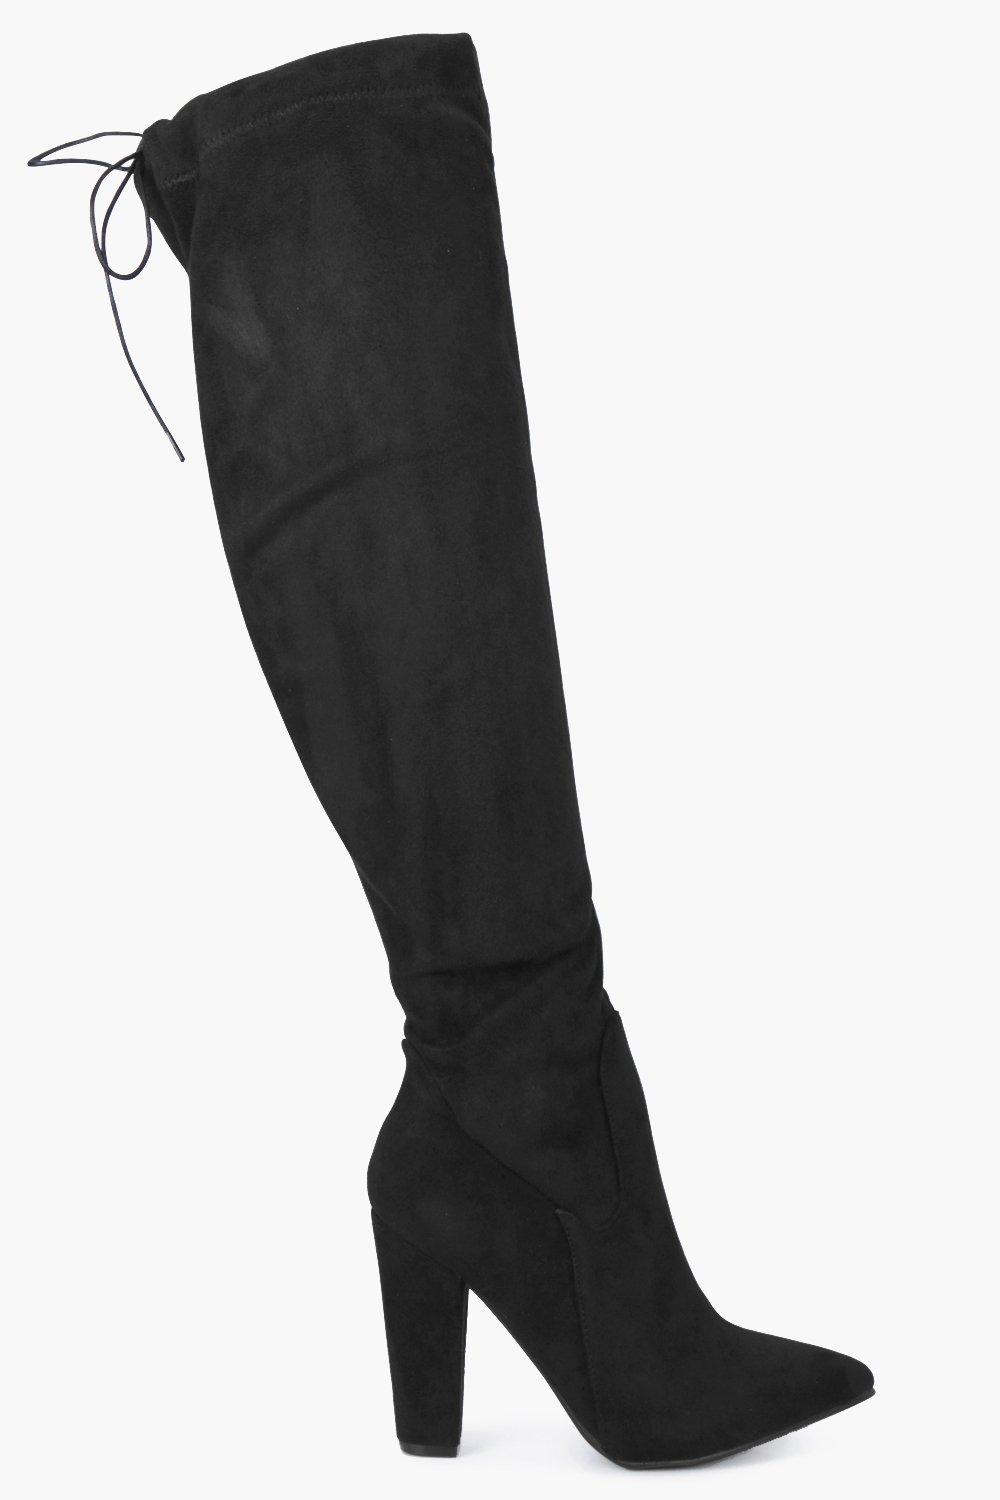 Rose Over Knee Pointed Block Heel boot at boohoo.com